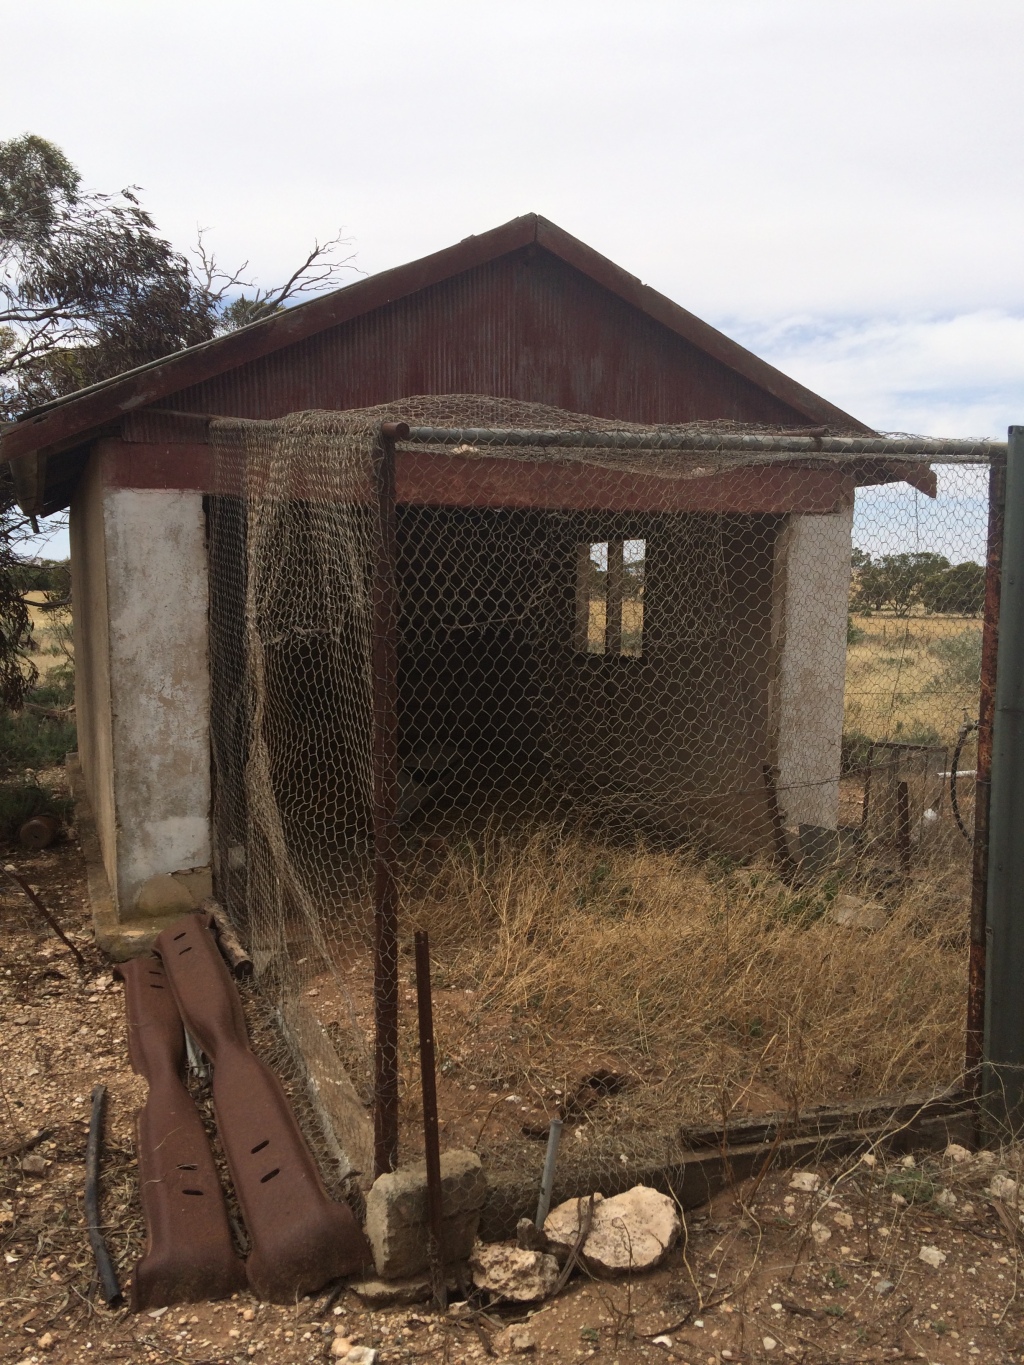 The last owners used this as a chook shed. I'm not sure what it was originally, but there are other foundations around. It might've been part of an original house.